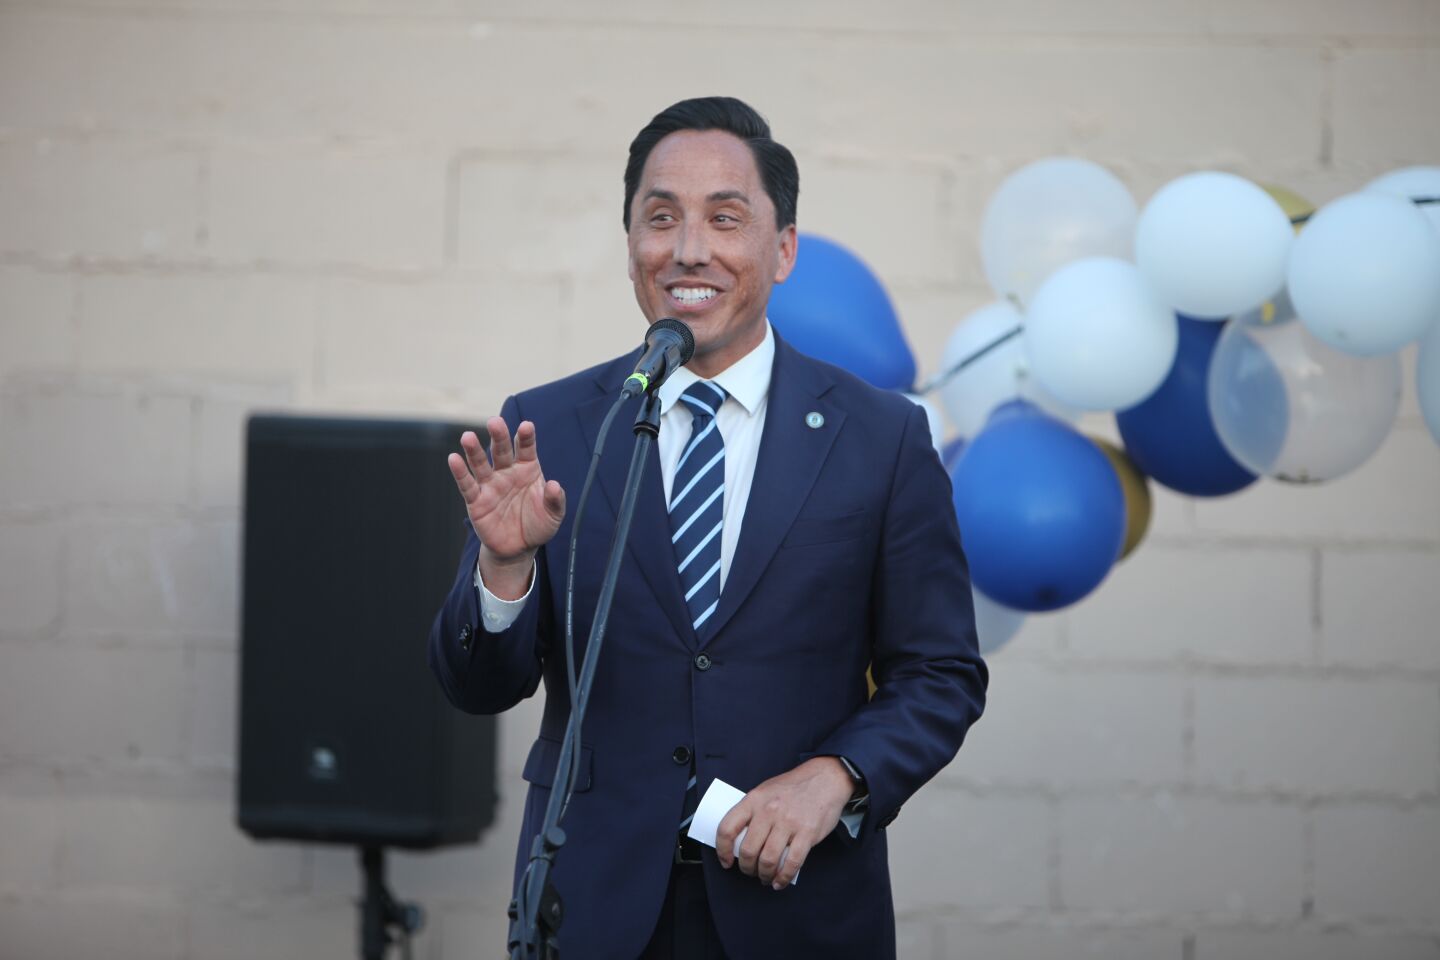 San Diego Mayor Todd Gloria speaks at the "Light Up the Night" celebration May 9 in Point Loma.